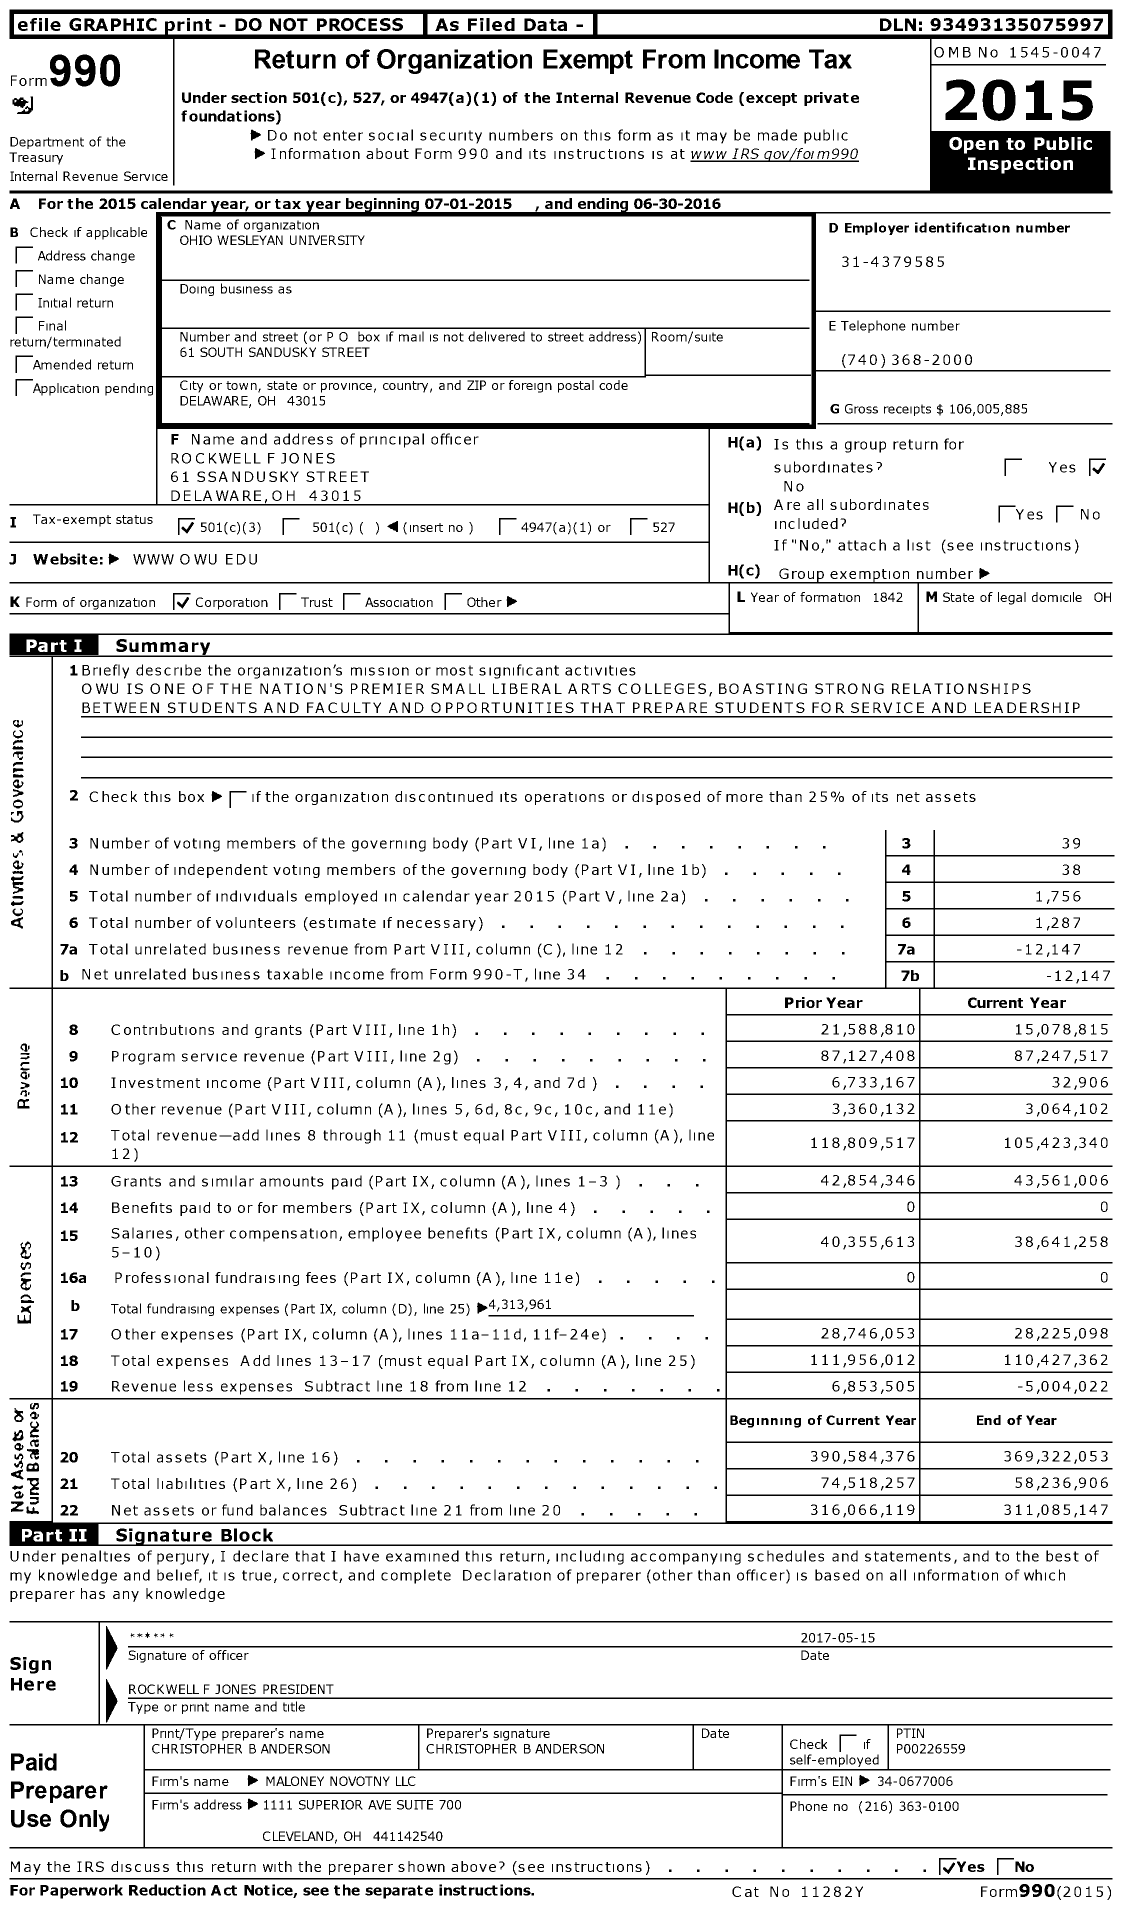 Image of first page of 2015 Form 990 for Ohio Wesleyan University (OWU)